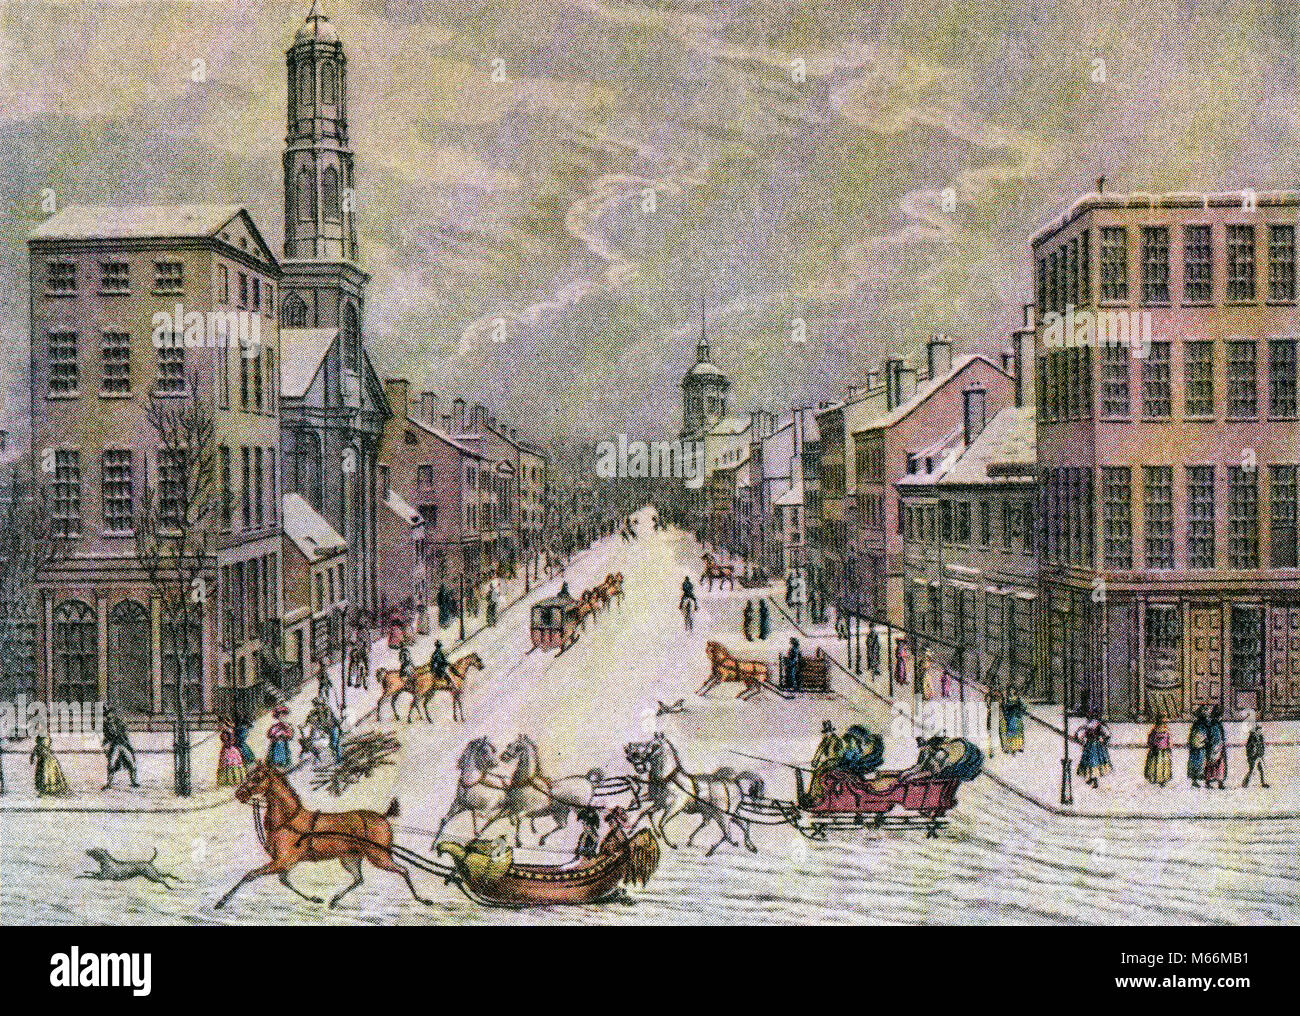 1836 WINTER SCENE ON WALL STREET COLOR HALFTONE NEW YORK CITY NY USA - kh13257 CPC001 HARS HISTORIC CARRIAGE HORIZON MAMMALS PROPERTY STREETS GOTHAM NYC REAL ESTATE NEW YORK STRUCTURES CITIES EDIFICE NEW YORK CITY SMALL GROUP OF ANIMALS HORSE DRAWN 1830s MAMMAL 1836 OLD FASHIONED PERSPECTIVE Stock Photo